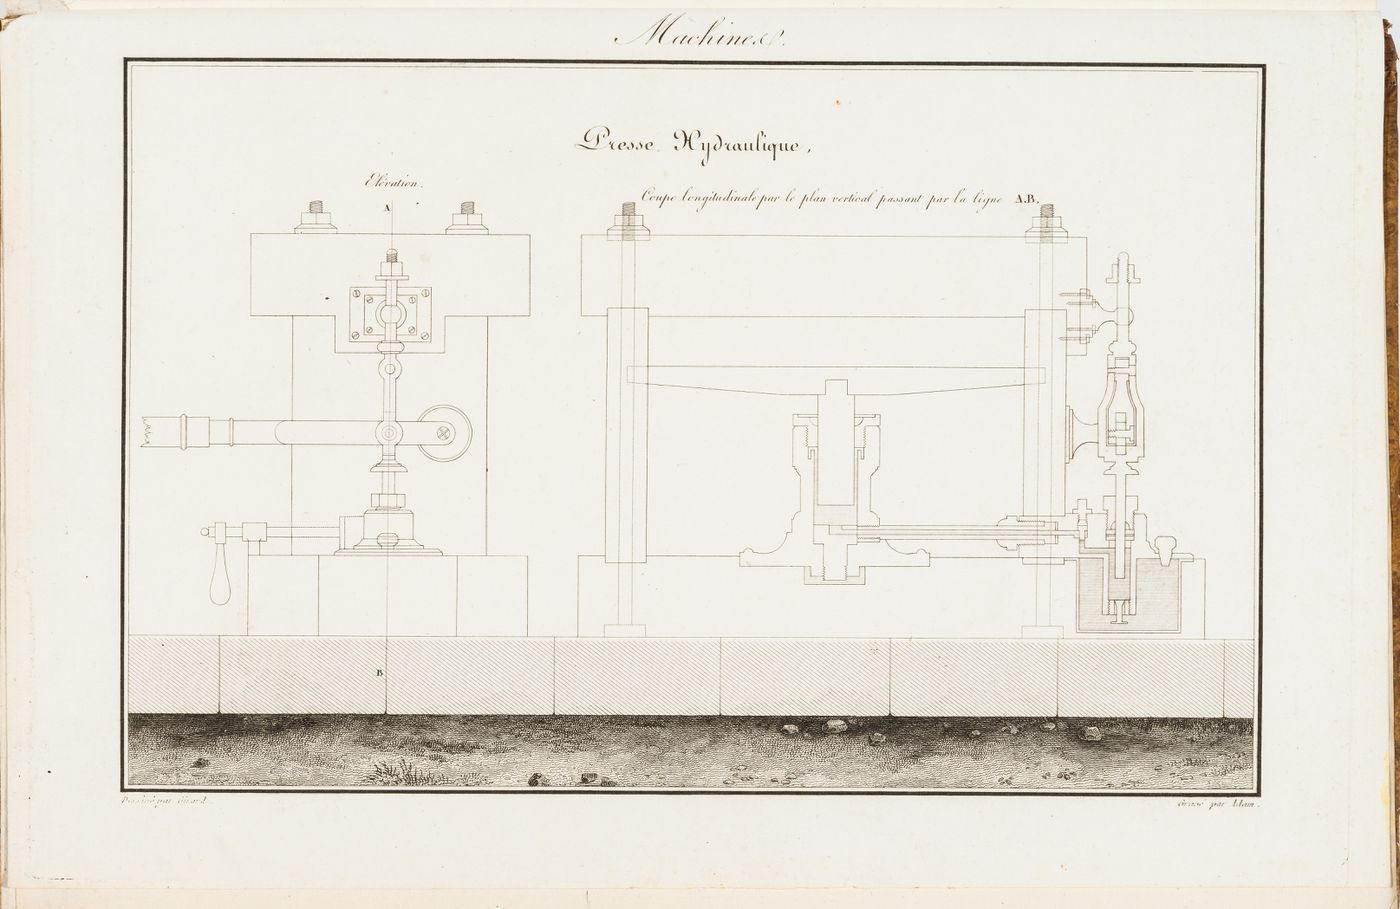 Elevation and section for a "Presse Hydraulique"